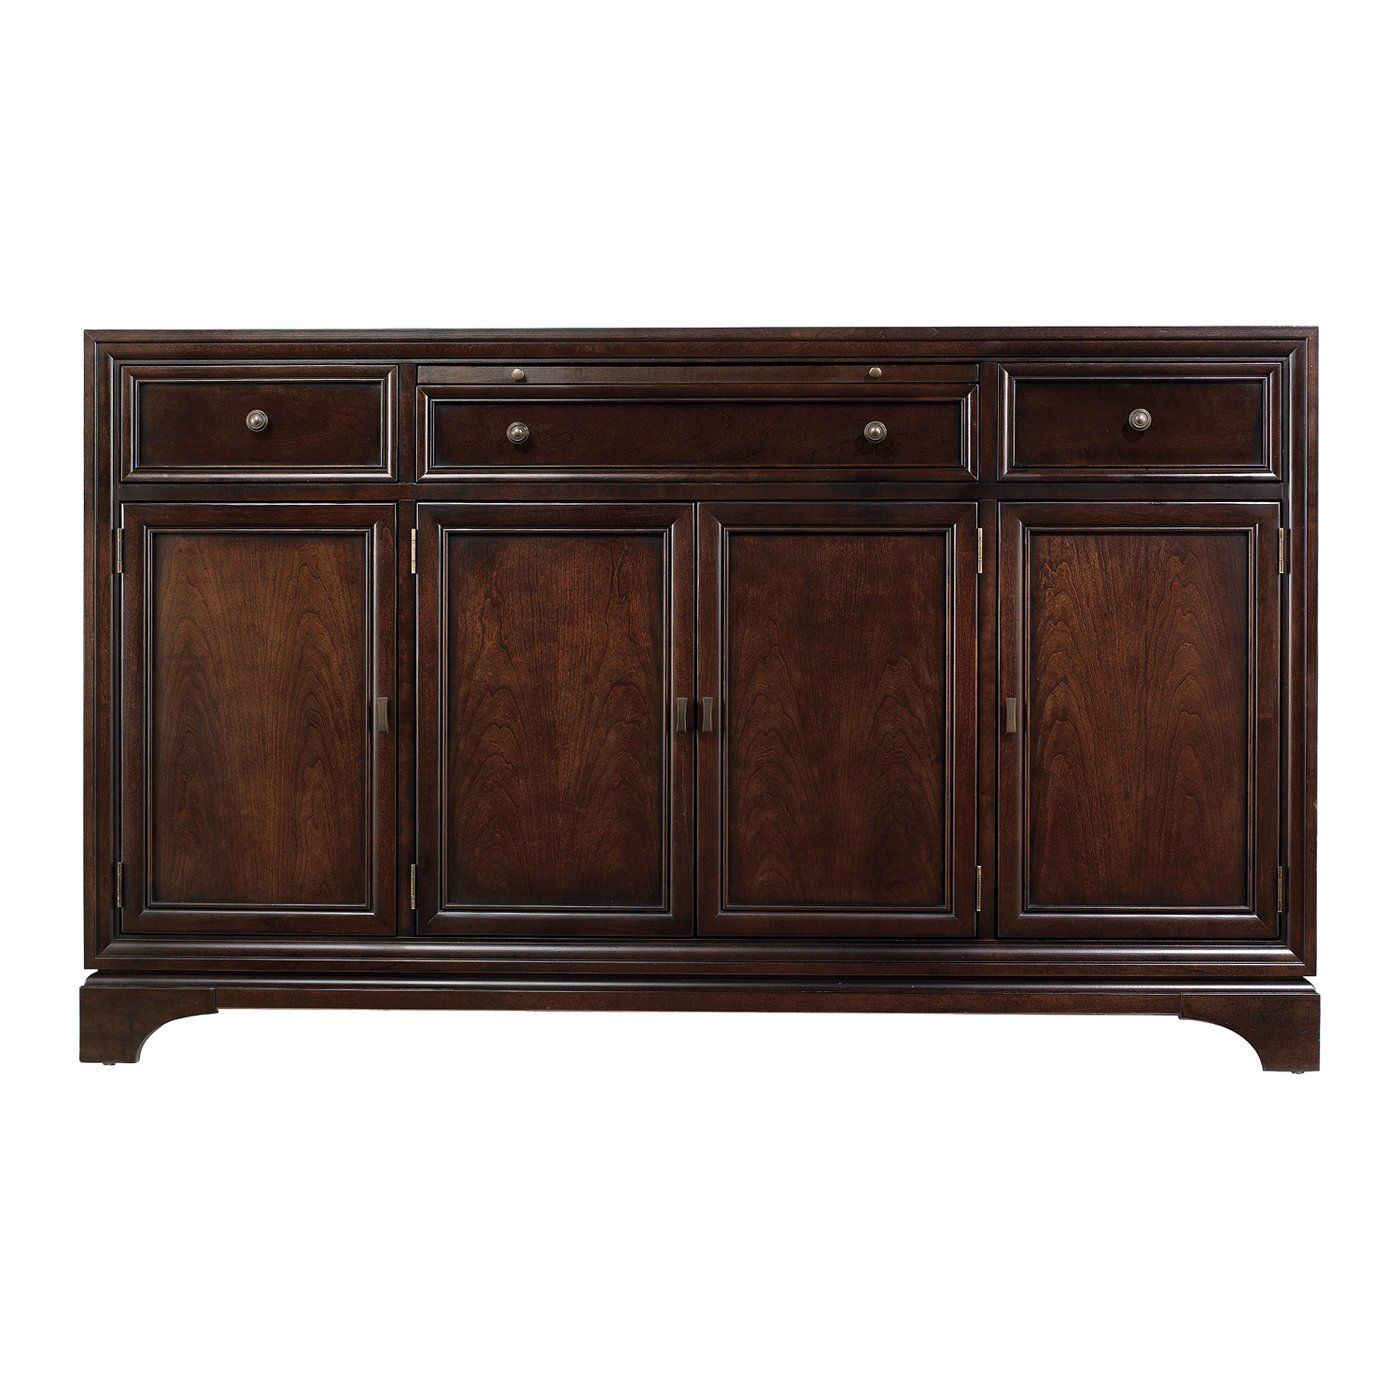 Stanley Furniture 816 61 07 Continuum Buffet Sideboard Within Current Steinhatchee Reclaimed Pine 4 Door Sideboards (Photo 9 of 20)